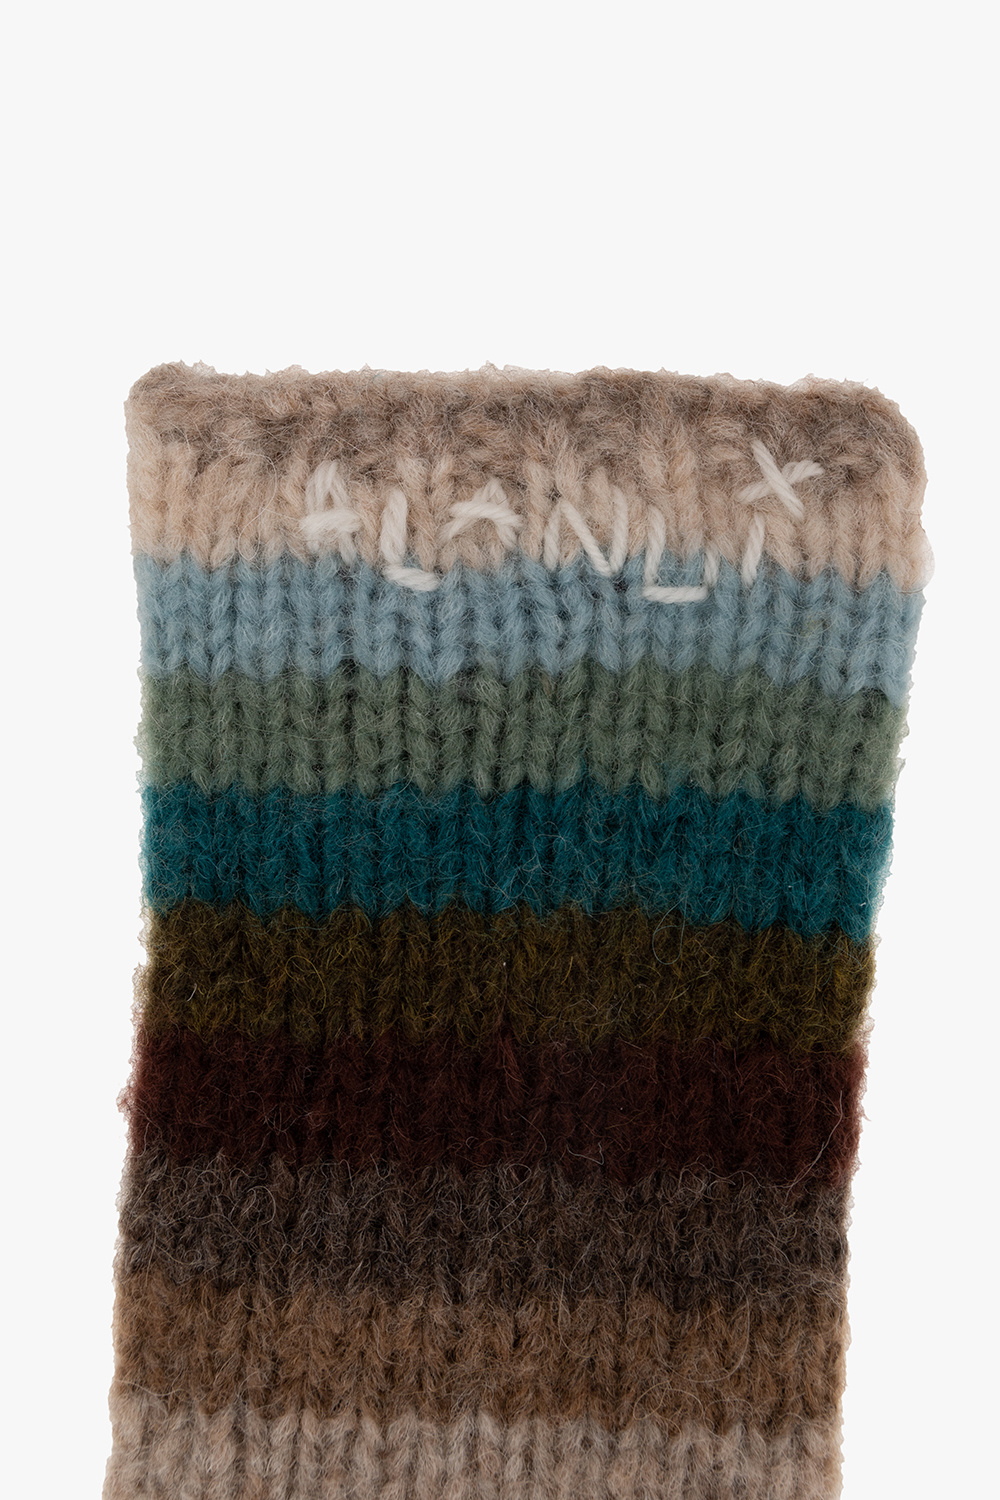 Alanui ‘Under The Nothern Sky’ fingerless gloves